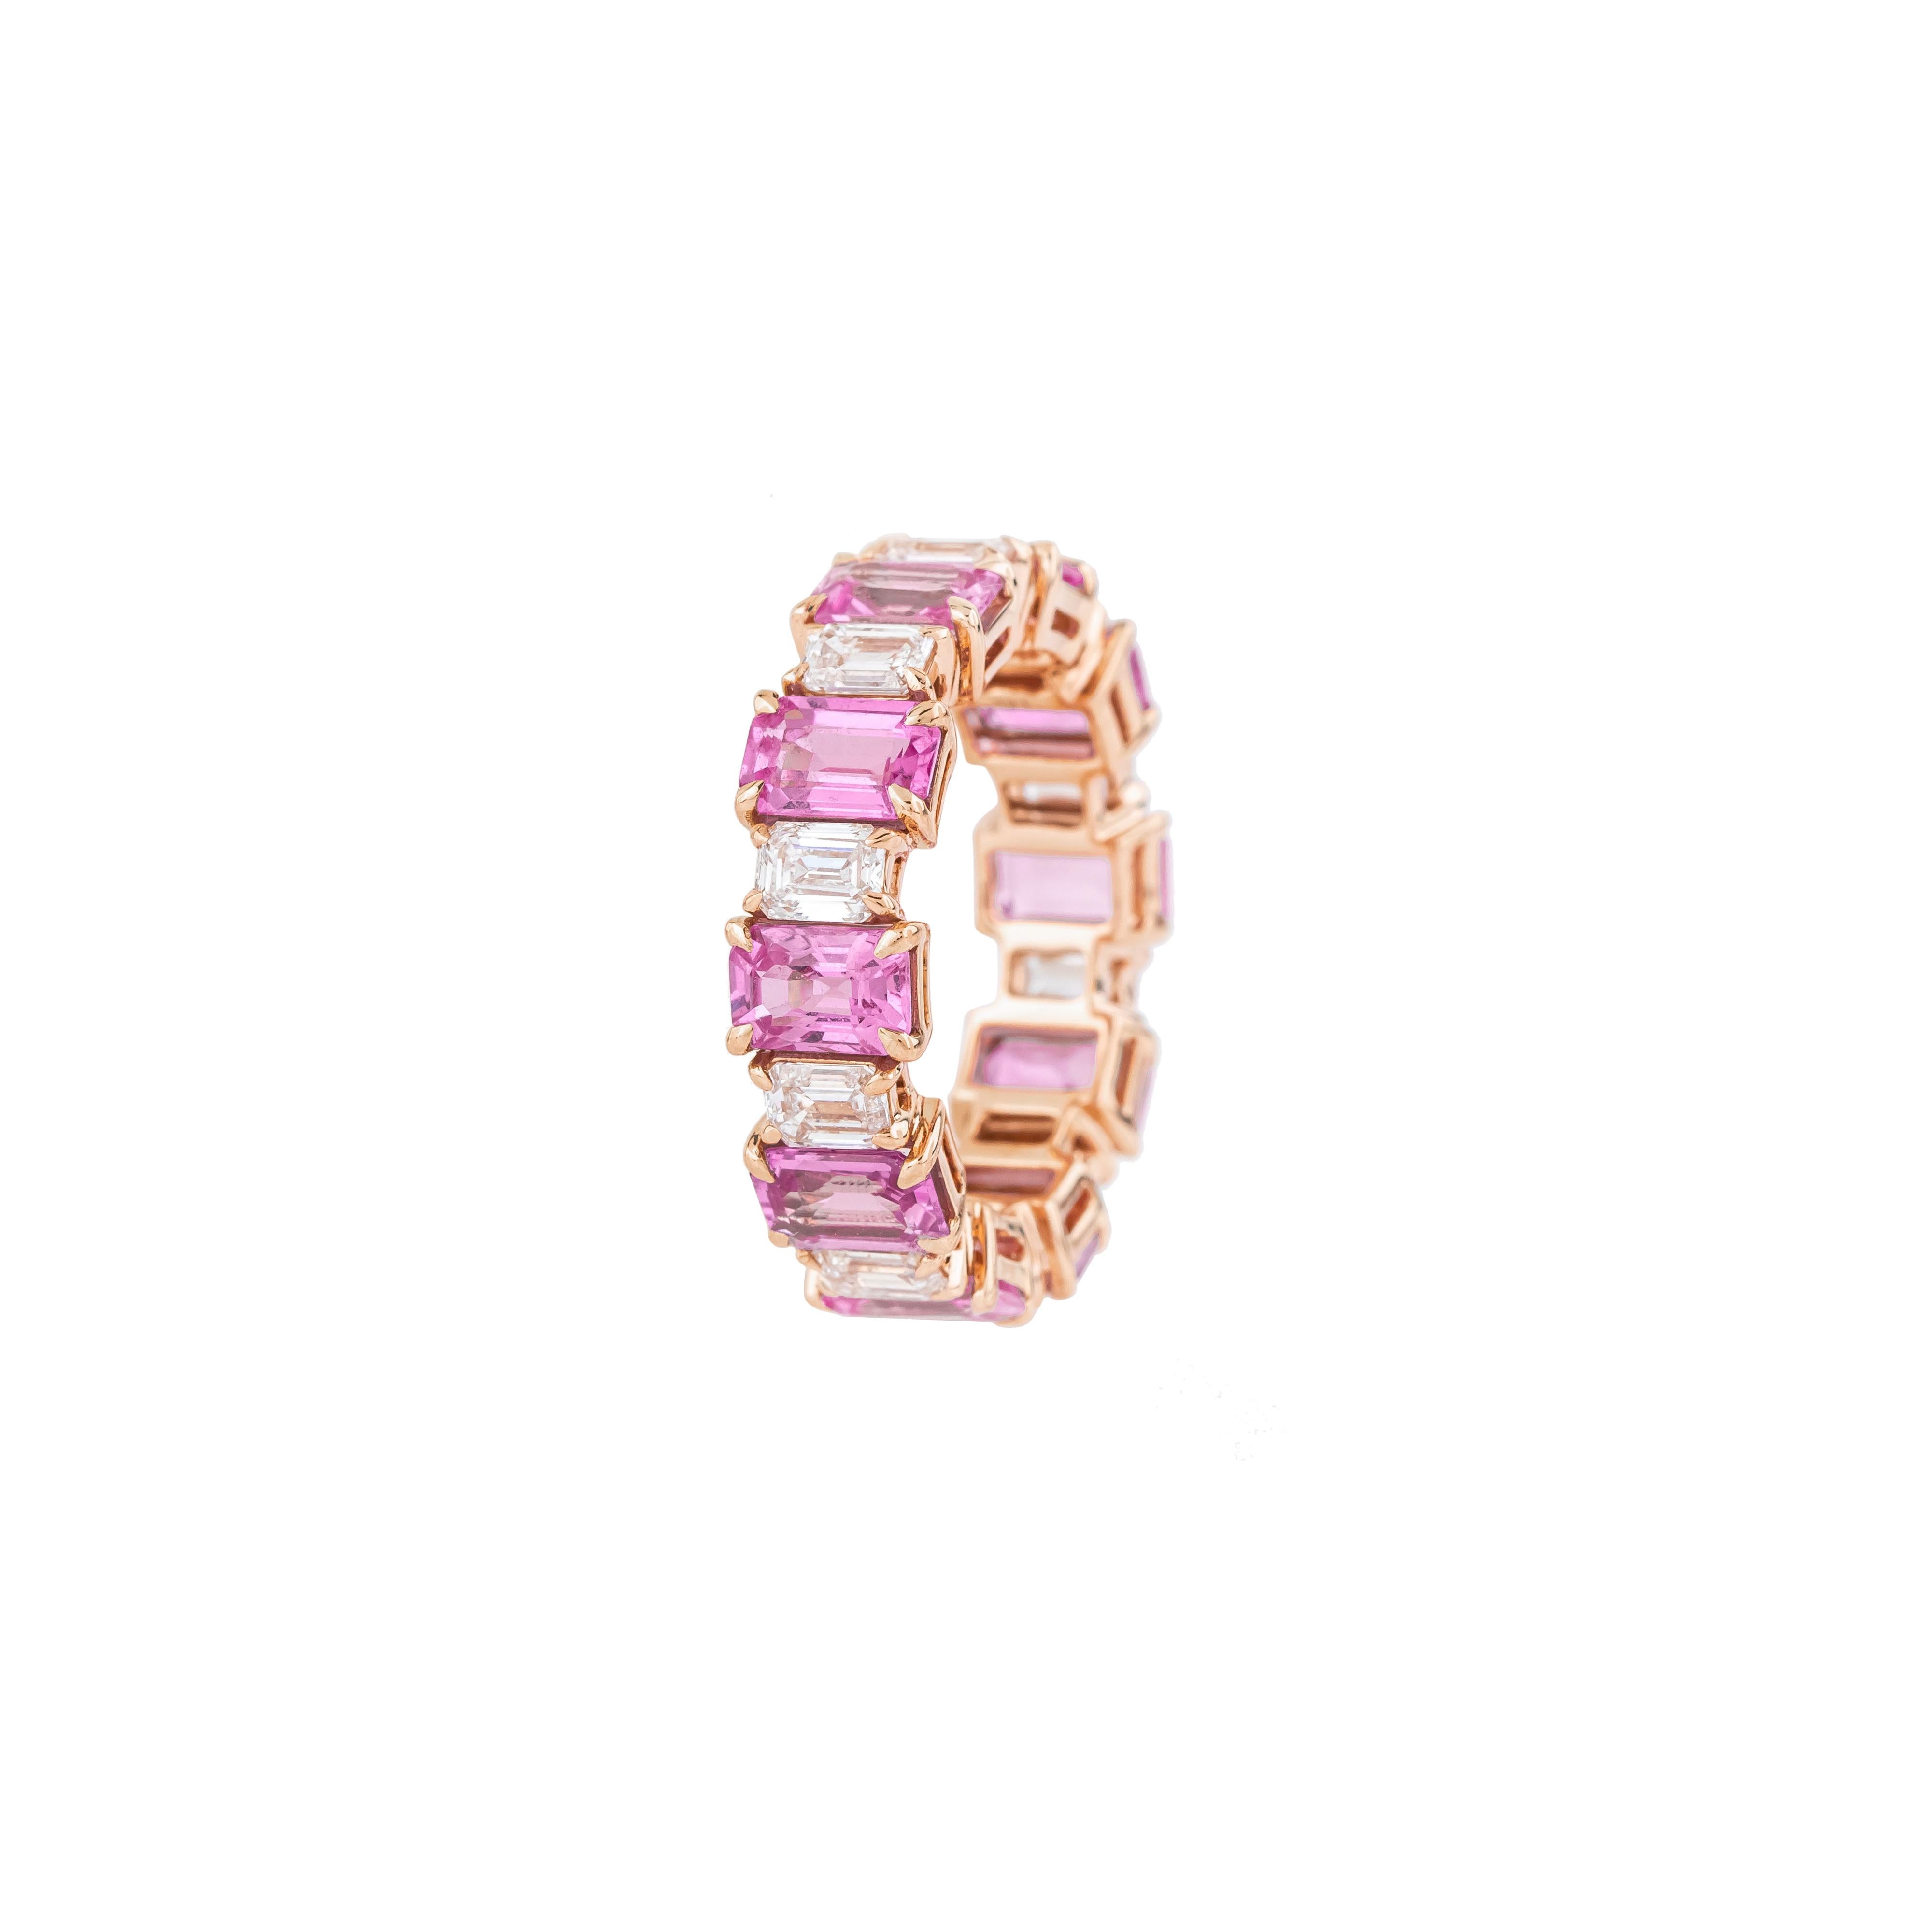 Modern 18 Karat Gold 8.81 Carat Diamond and Pink Sapphire Eternity Band Ring For Sale